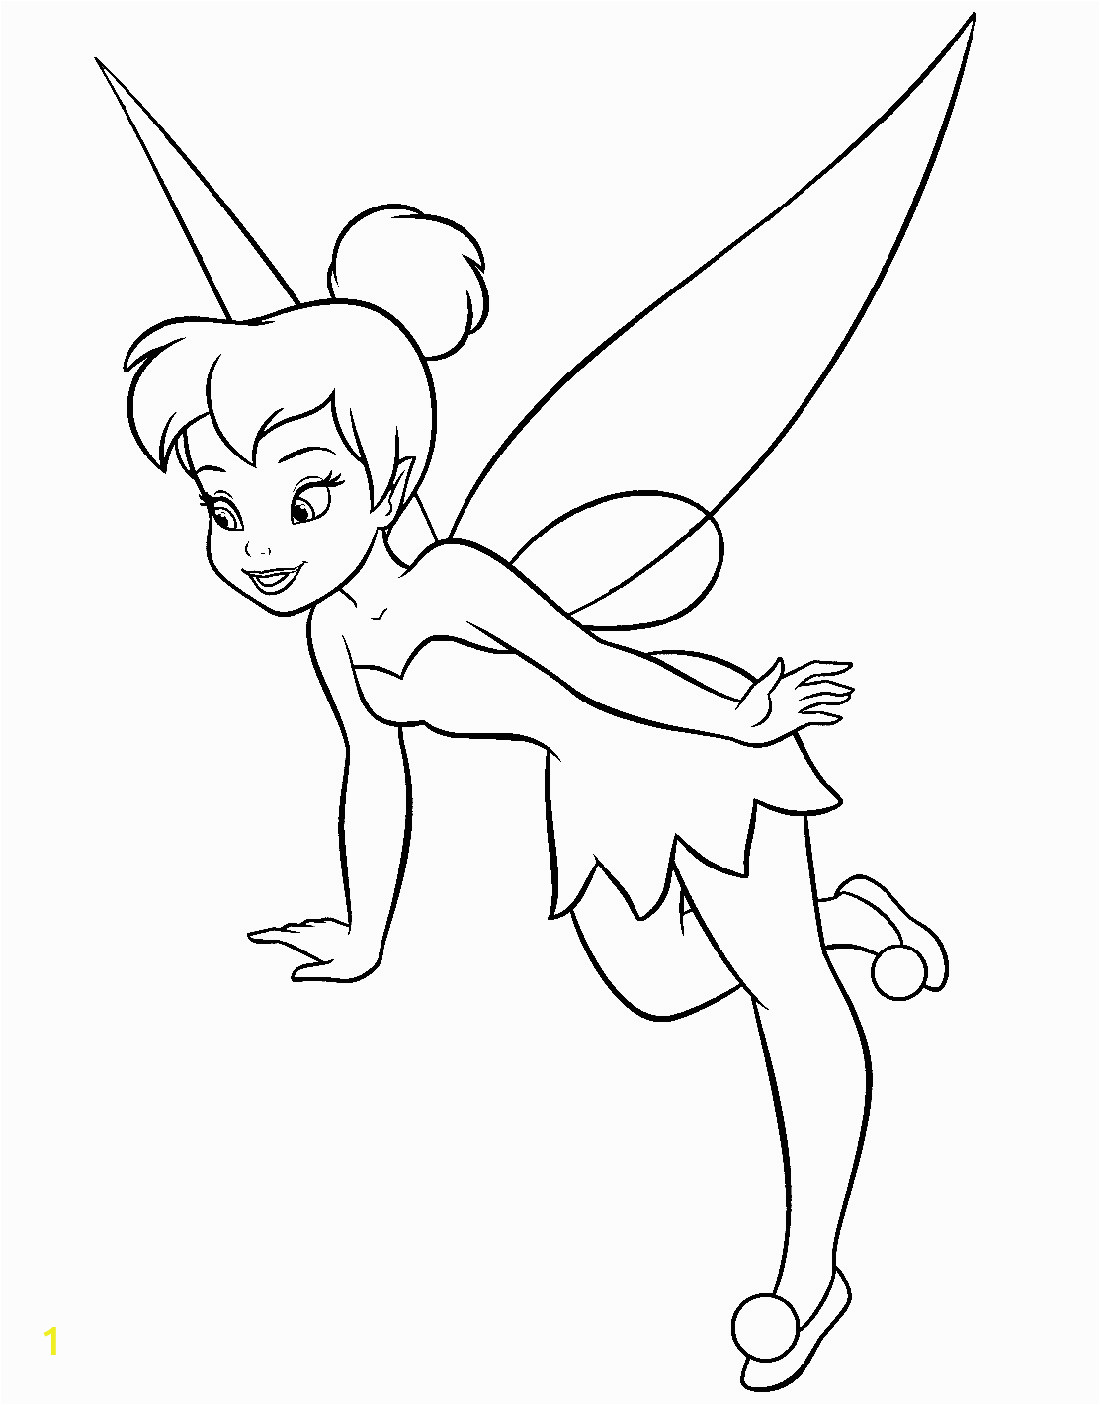 Tinkerbell Coloring Pages Games Online Free Tinkerbell Flying Coloring Play Free Coloring Game Line